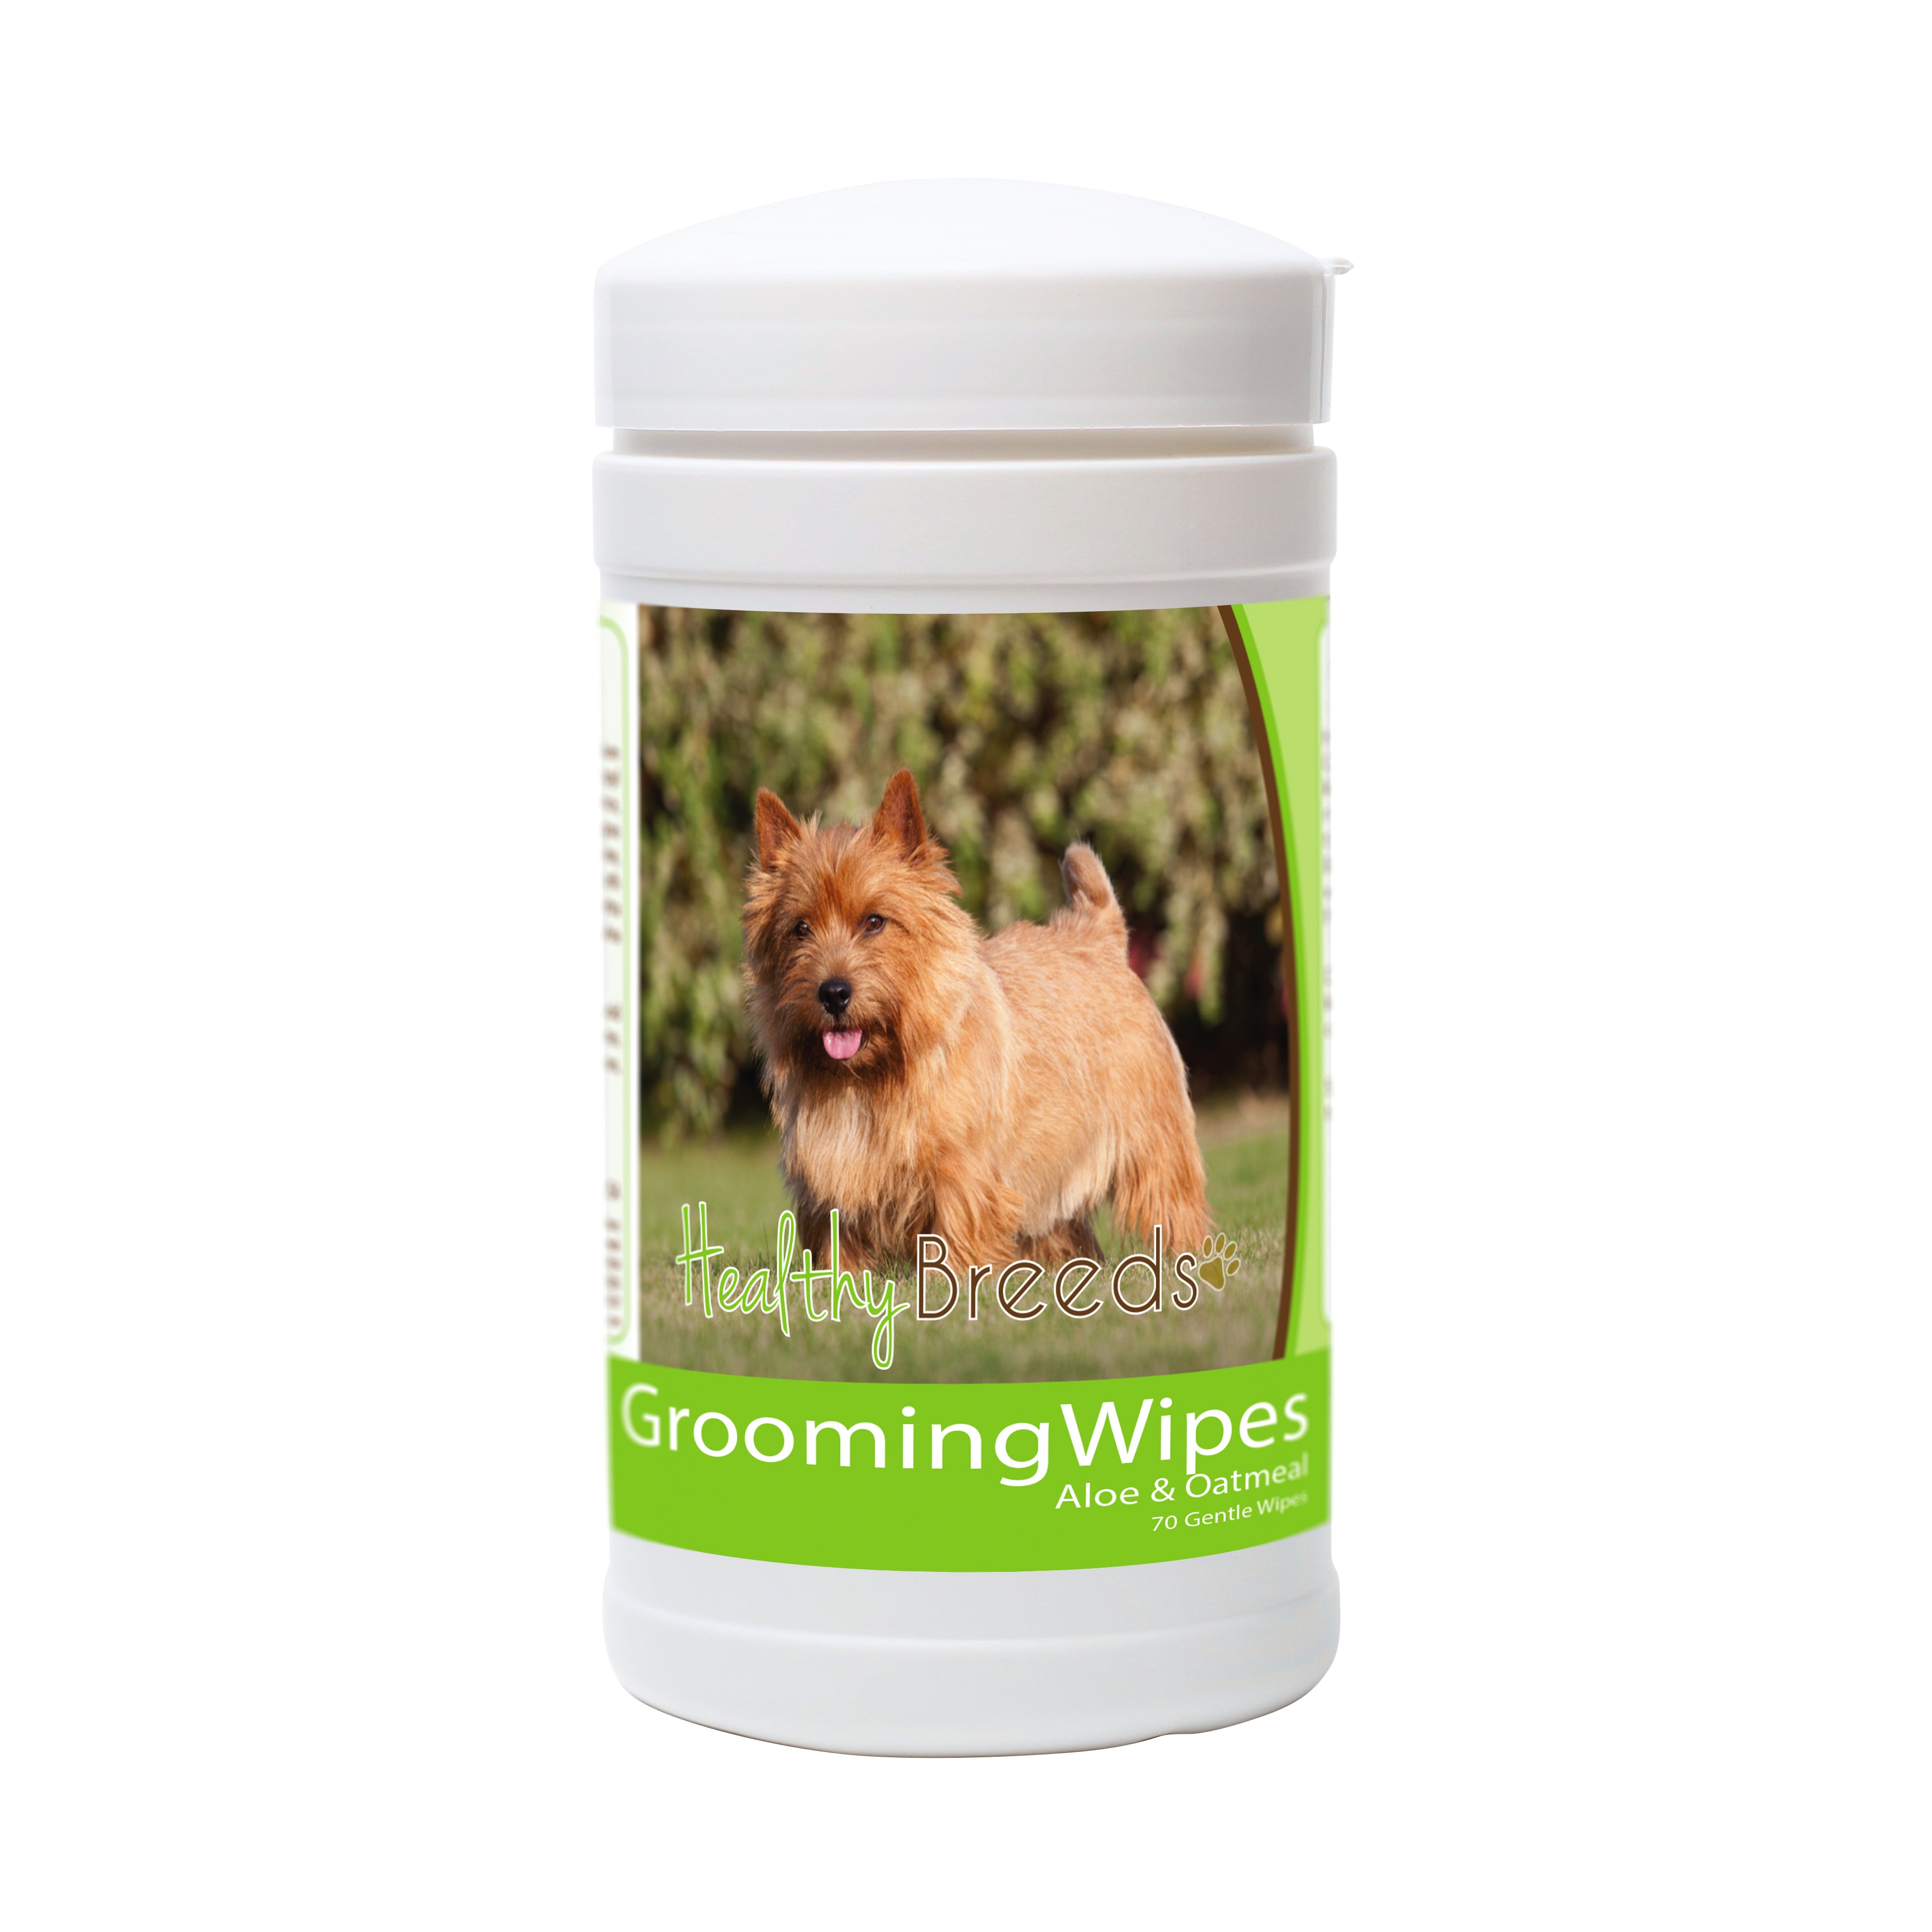 Norwich Terrier Grooming Wipes 70 Count